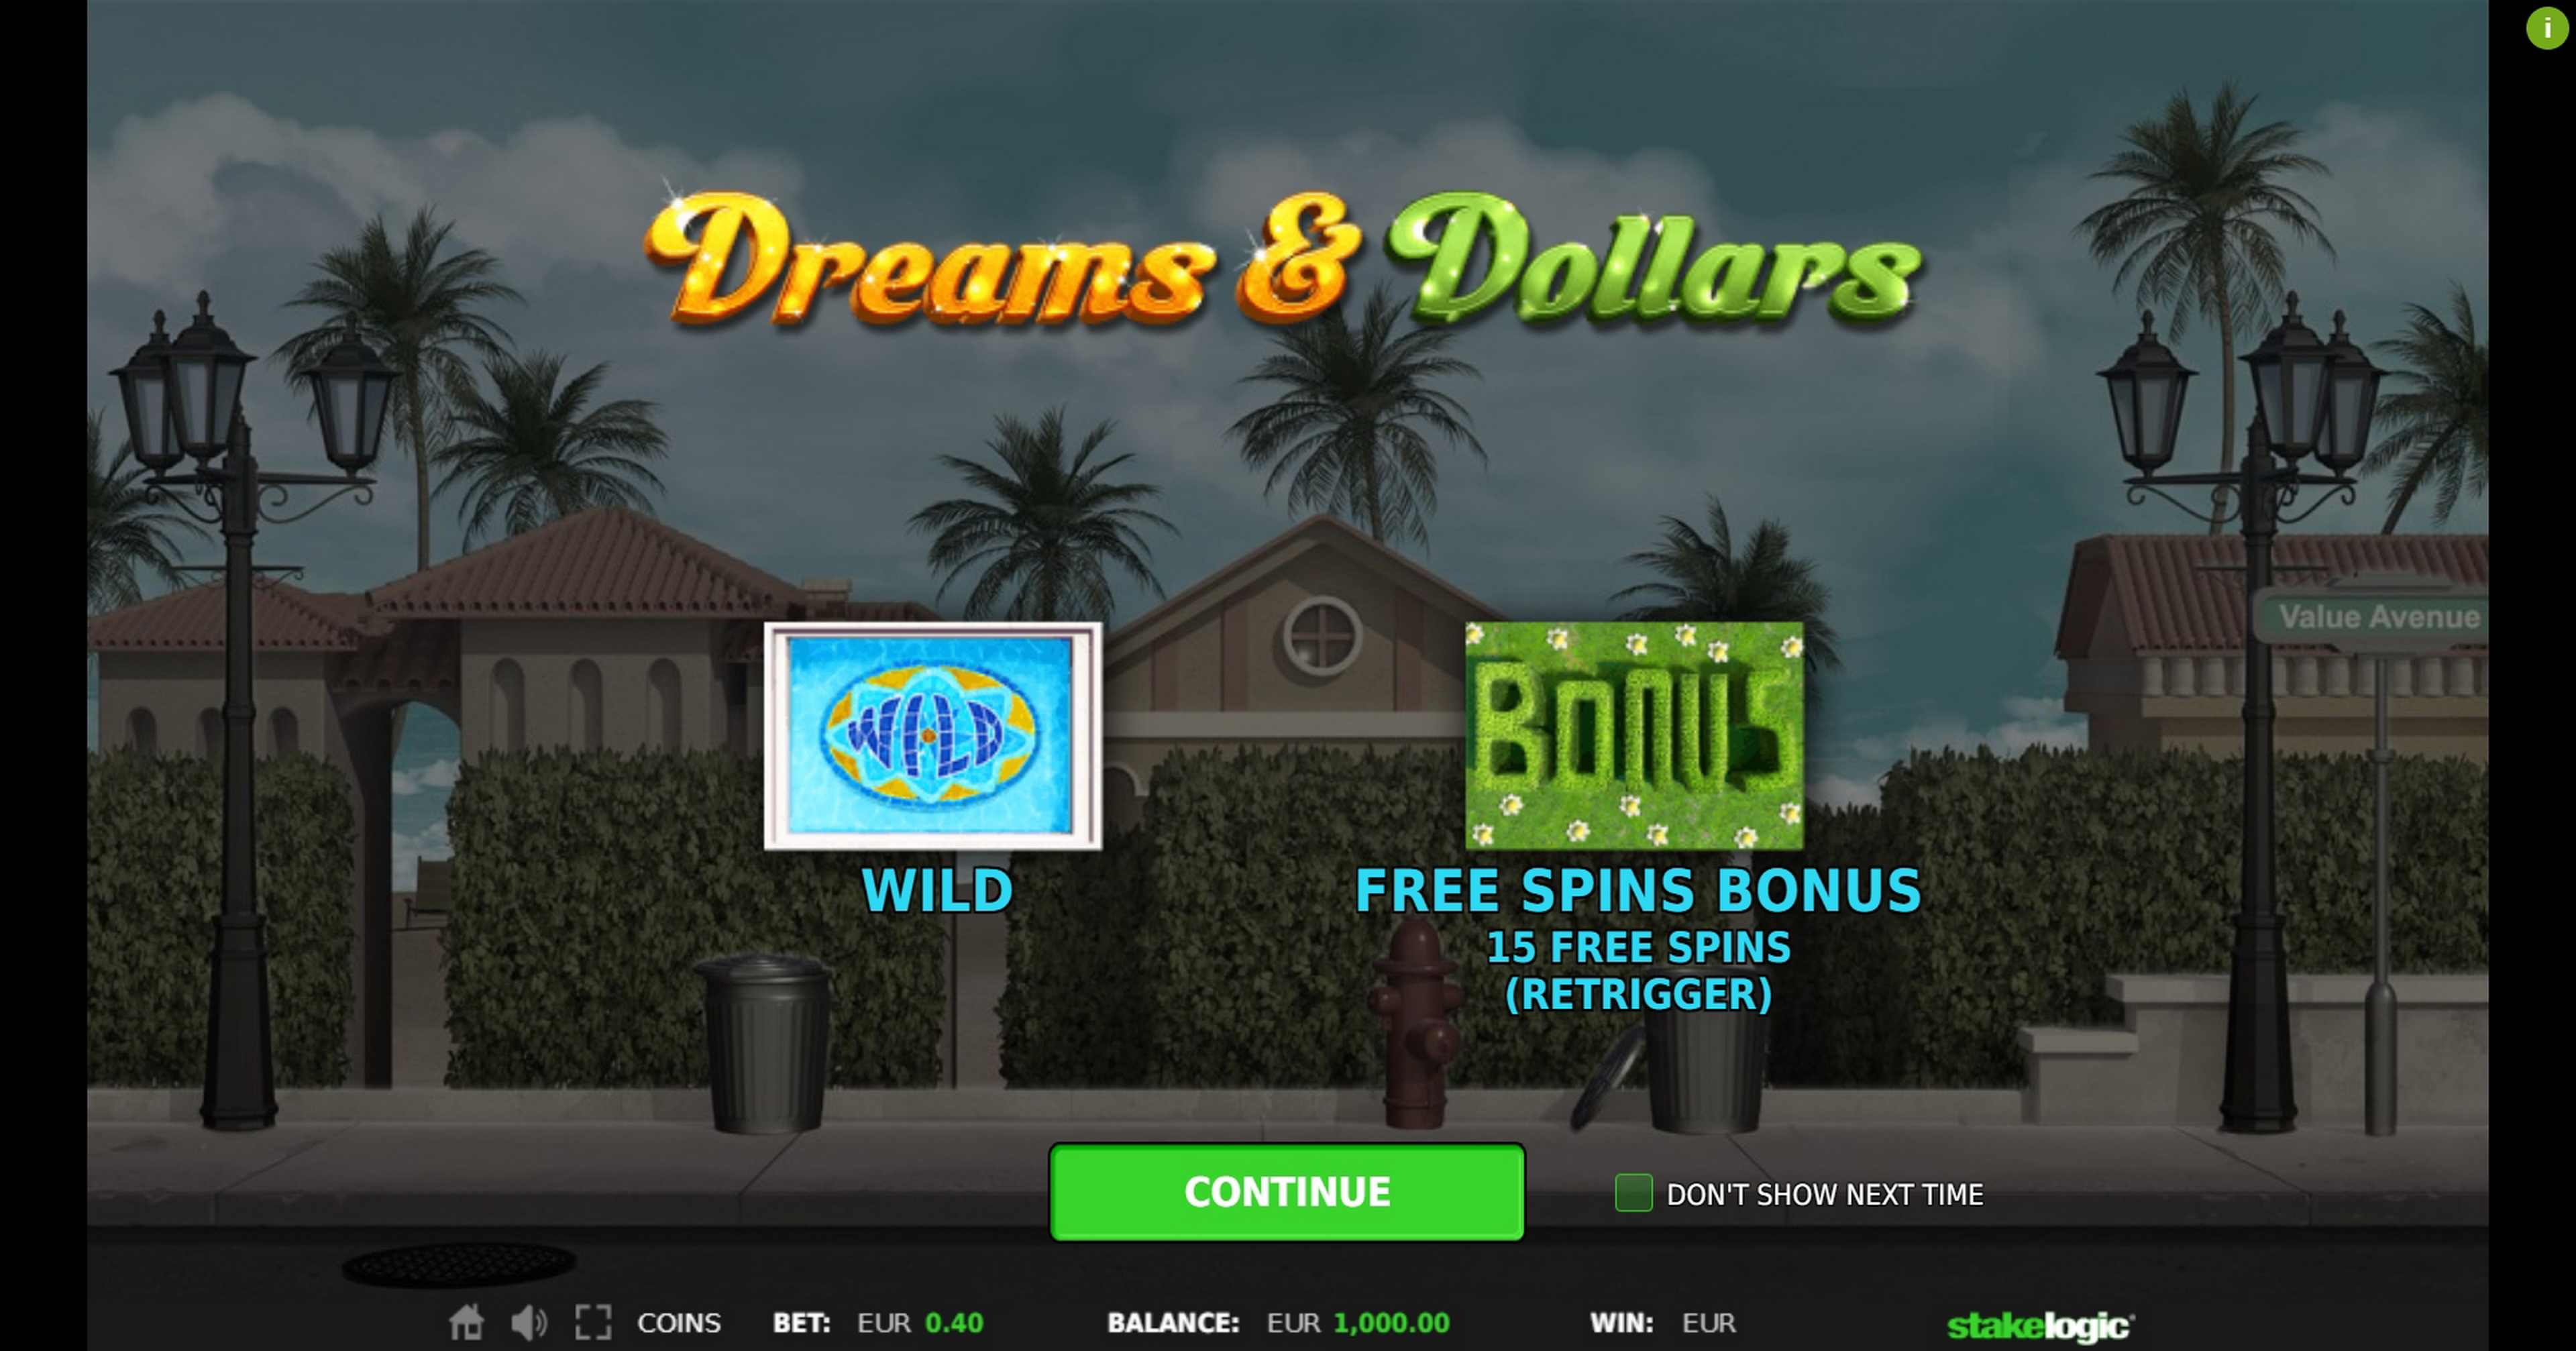 Play Dreams & Dollars Free Casino Slot Game by Stakelogic